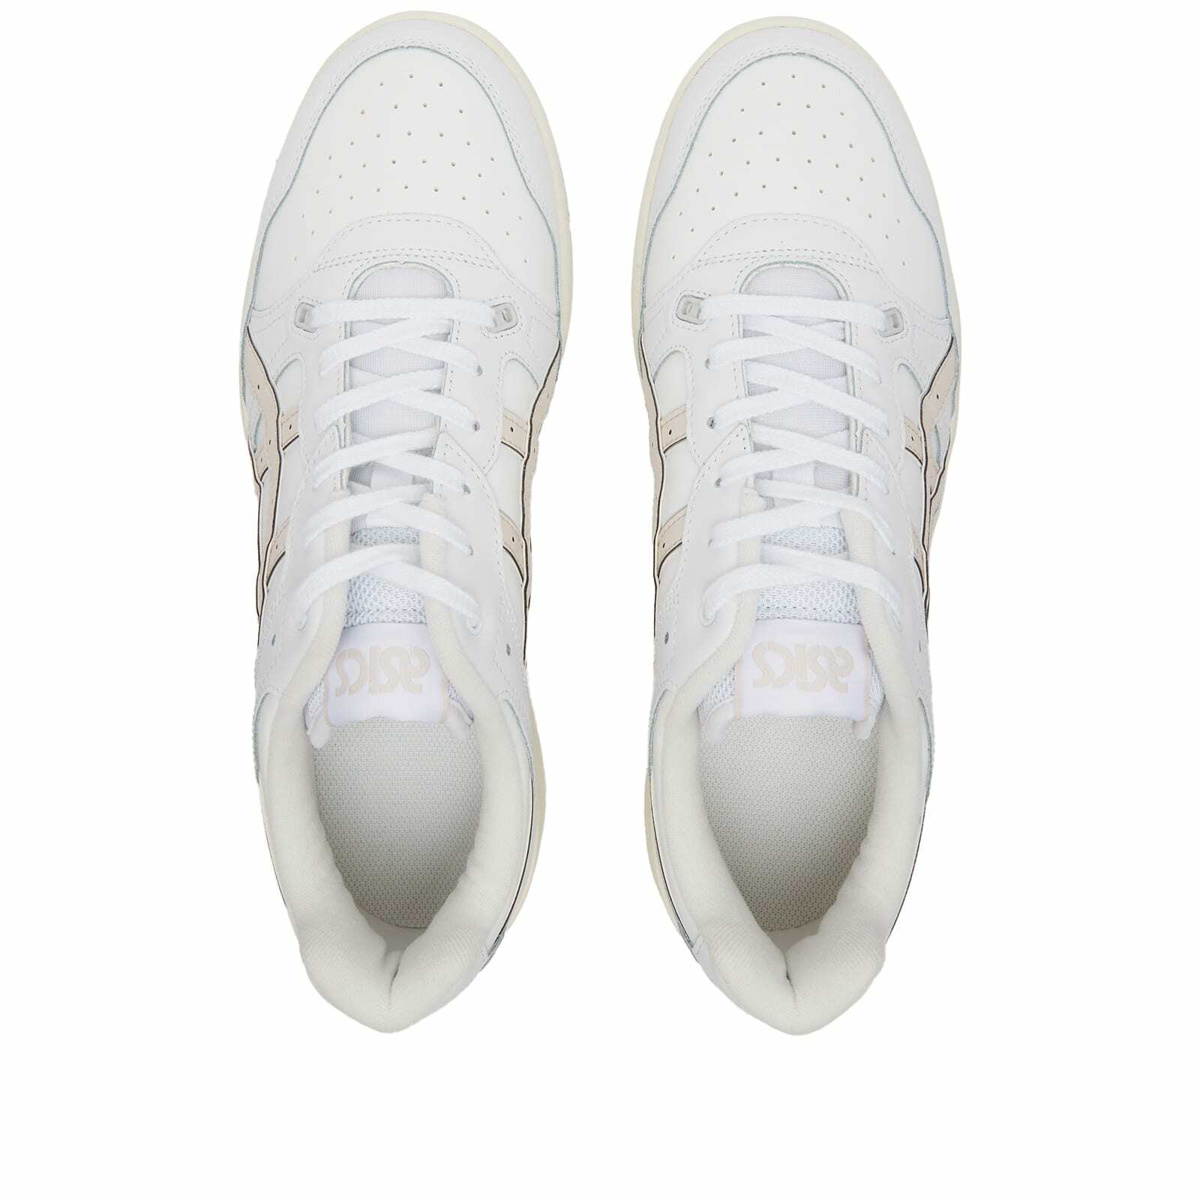 Asics Ex89 Sneakers in White/Mineral Beige ASICS